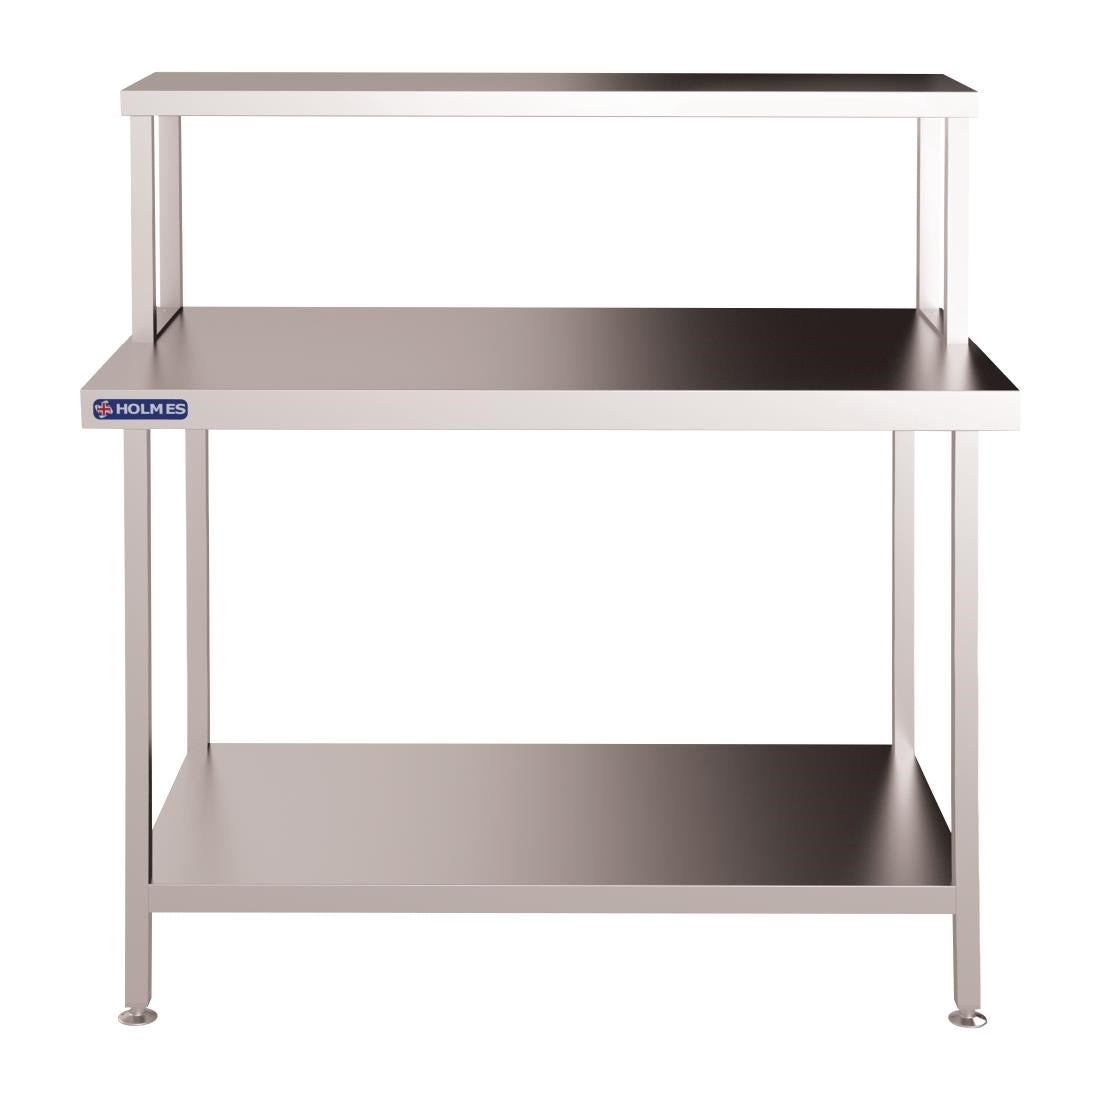 FC440 Holmes Stainless Steel Wall Table Welded with Gantry 900mm JD Catering Equipment Solutions Ltd